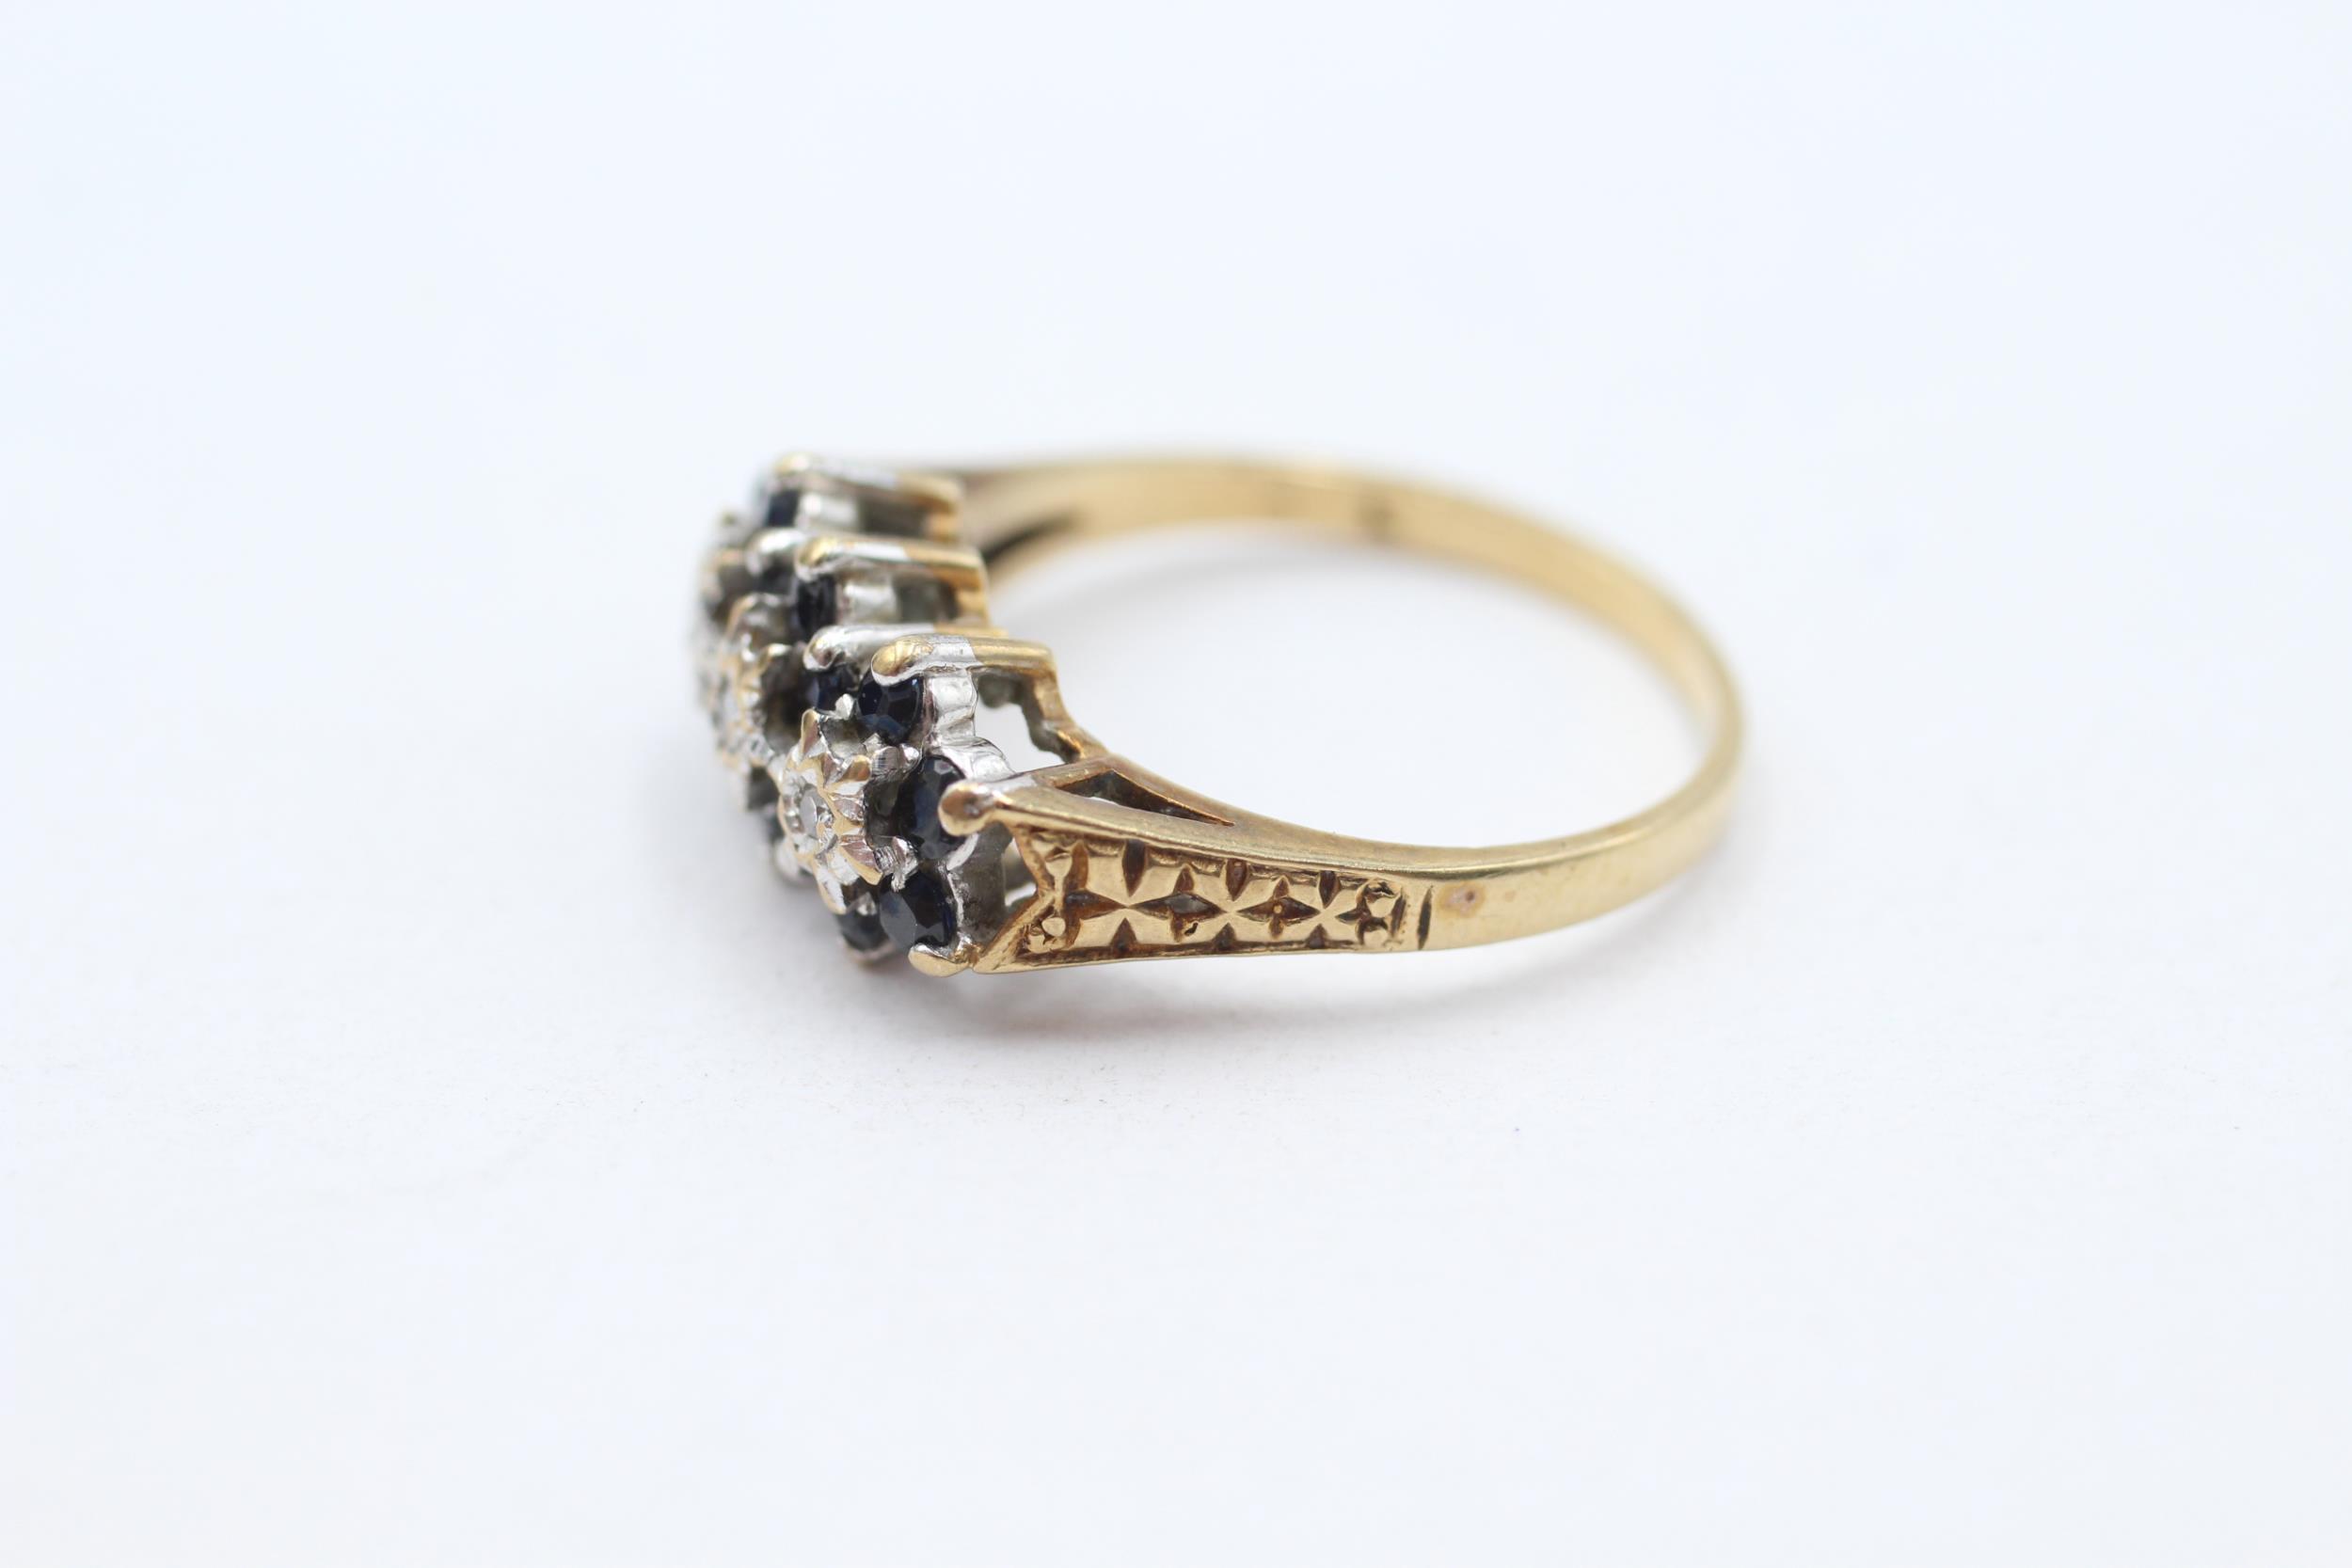 9ct gold vintage sapphire & diamond dress ring with patterned shoulders Size L - 2.6 g - Image 4 of 5